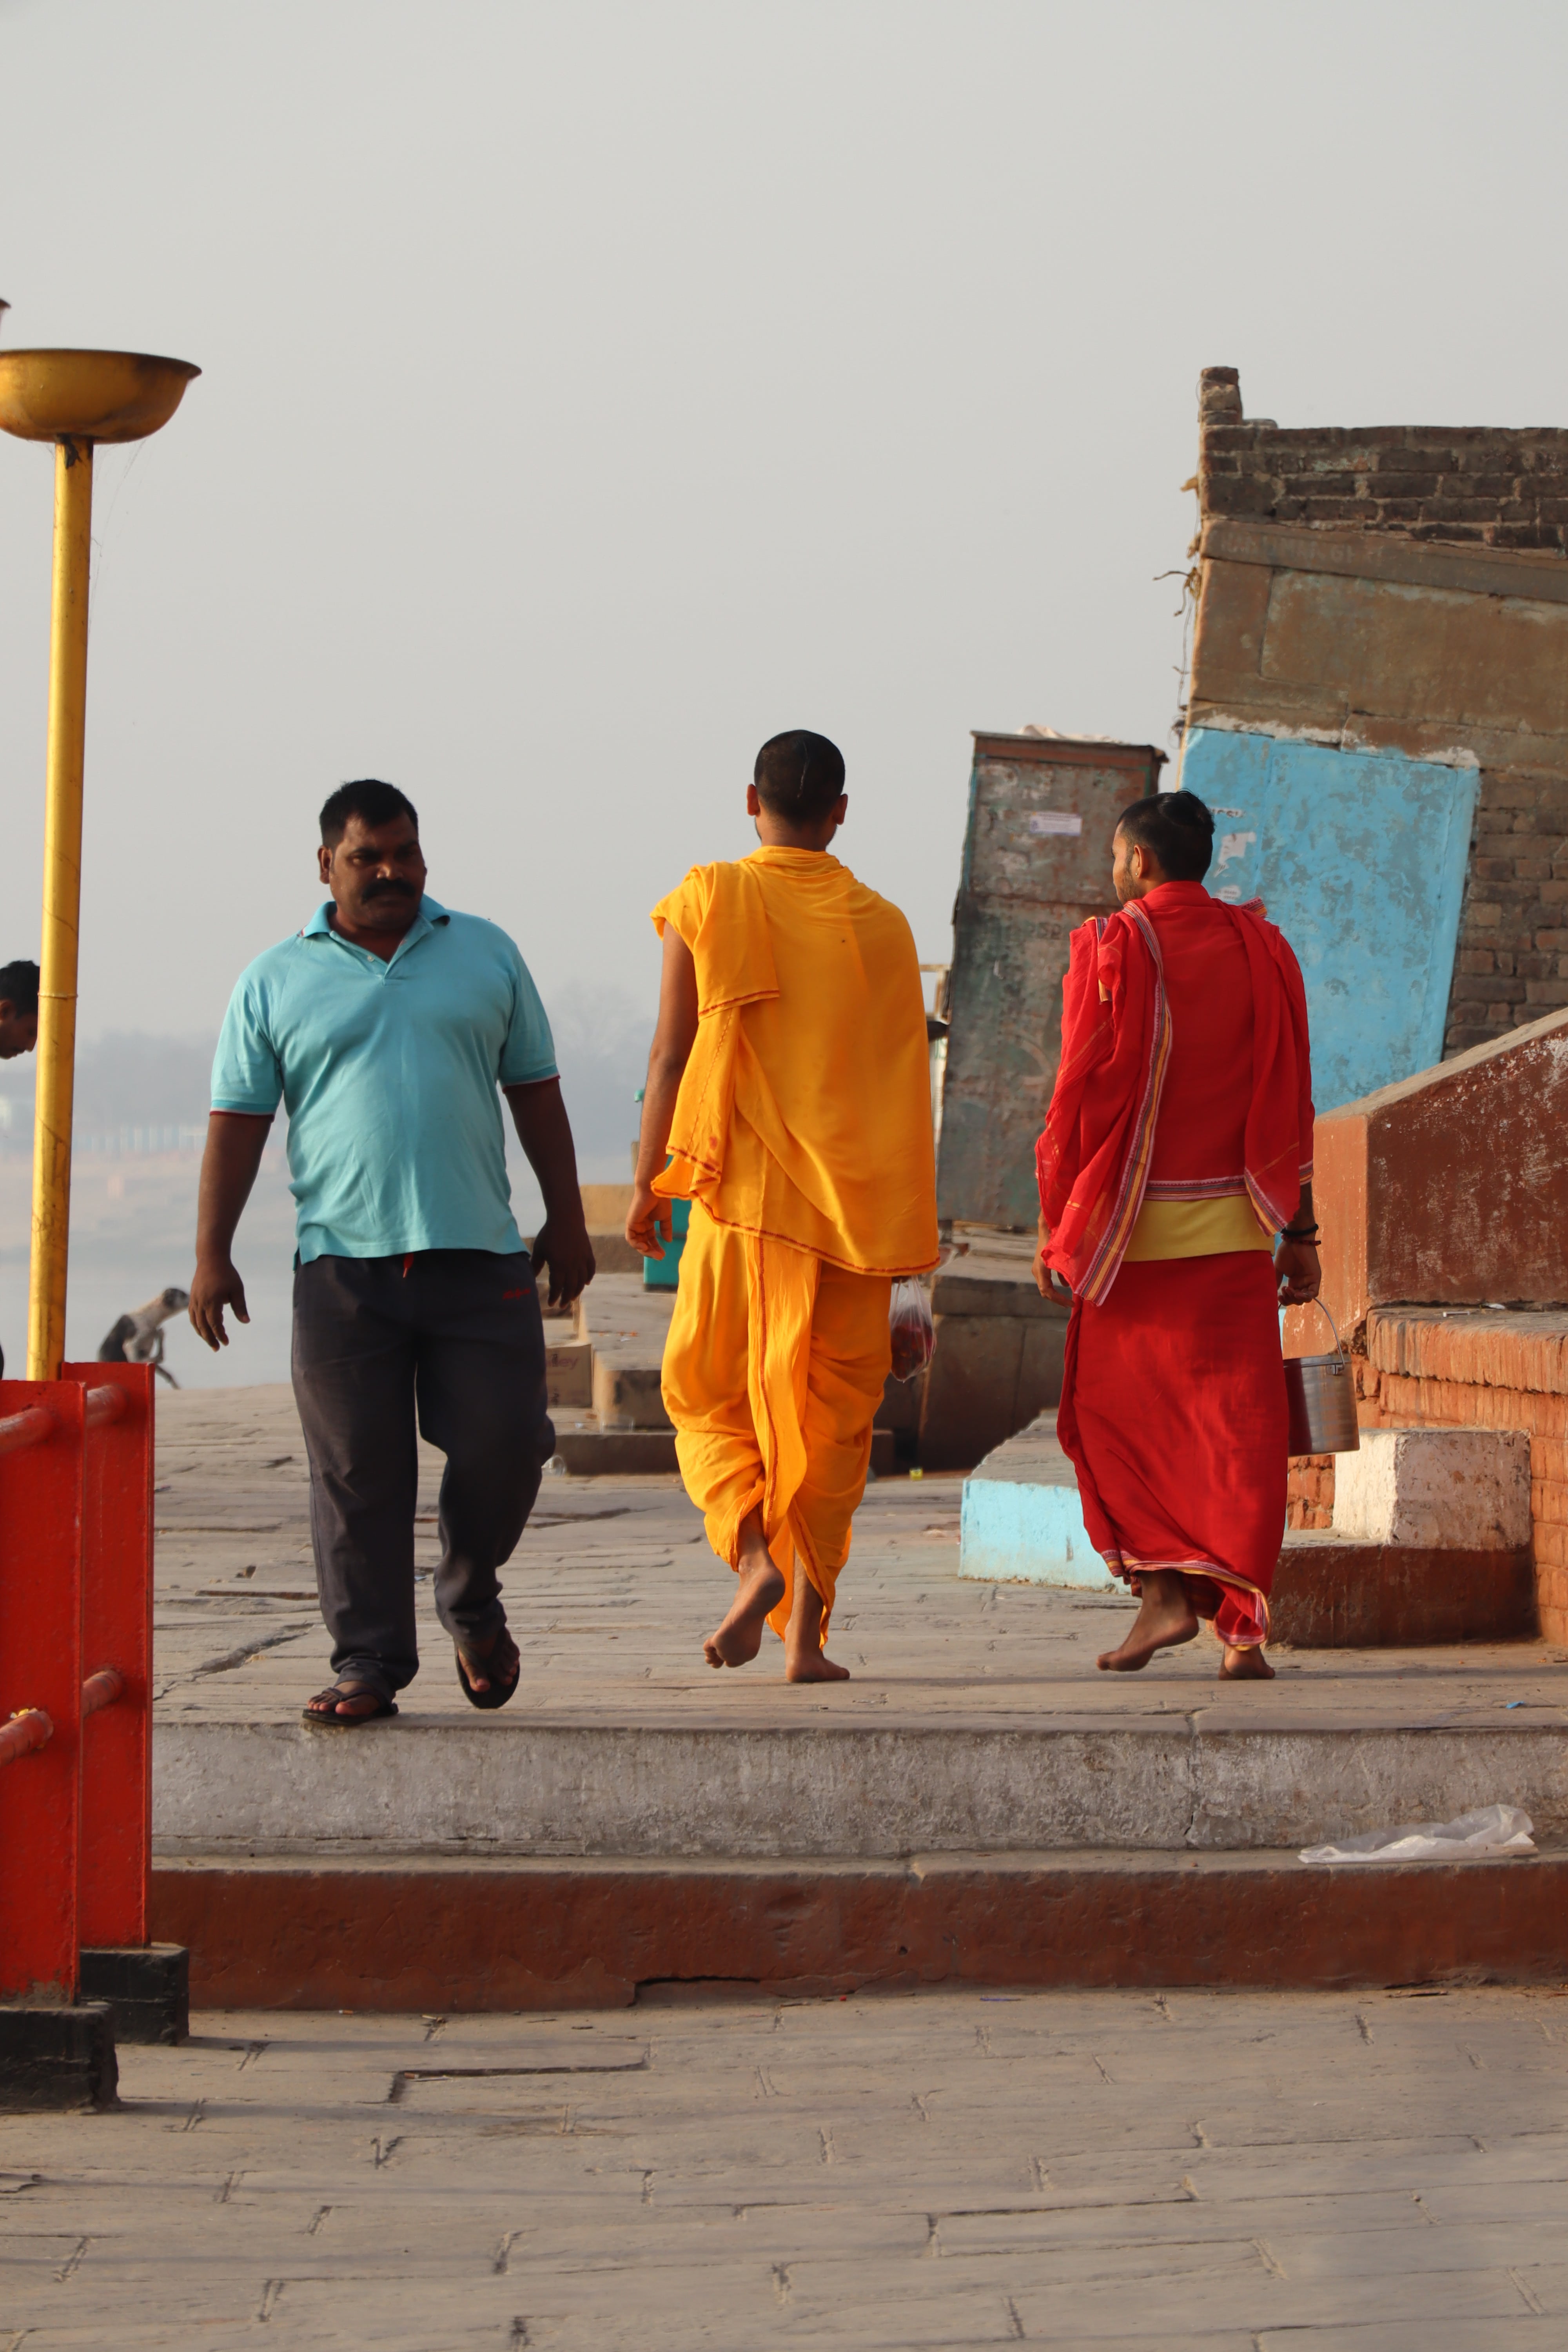 Candid photography of three men with colorful dress in Varanasi ghat